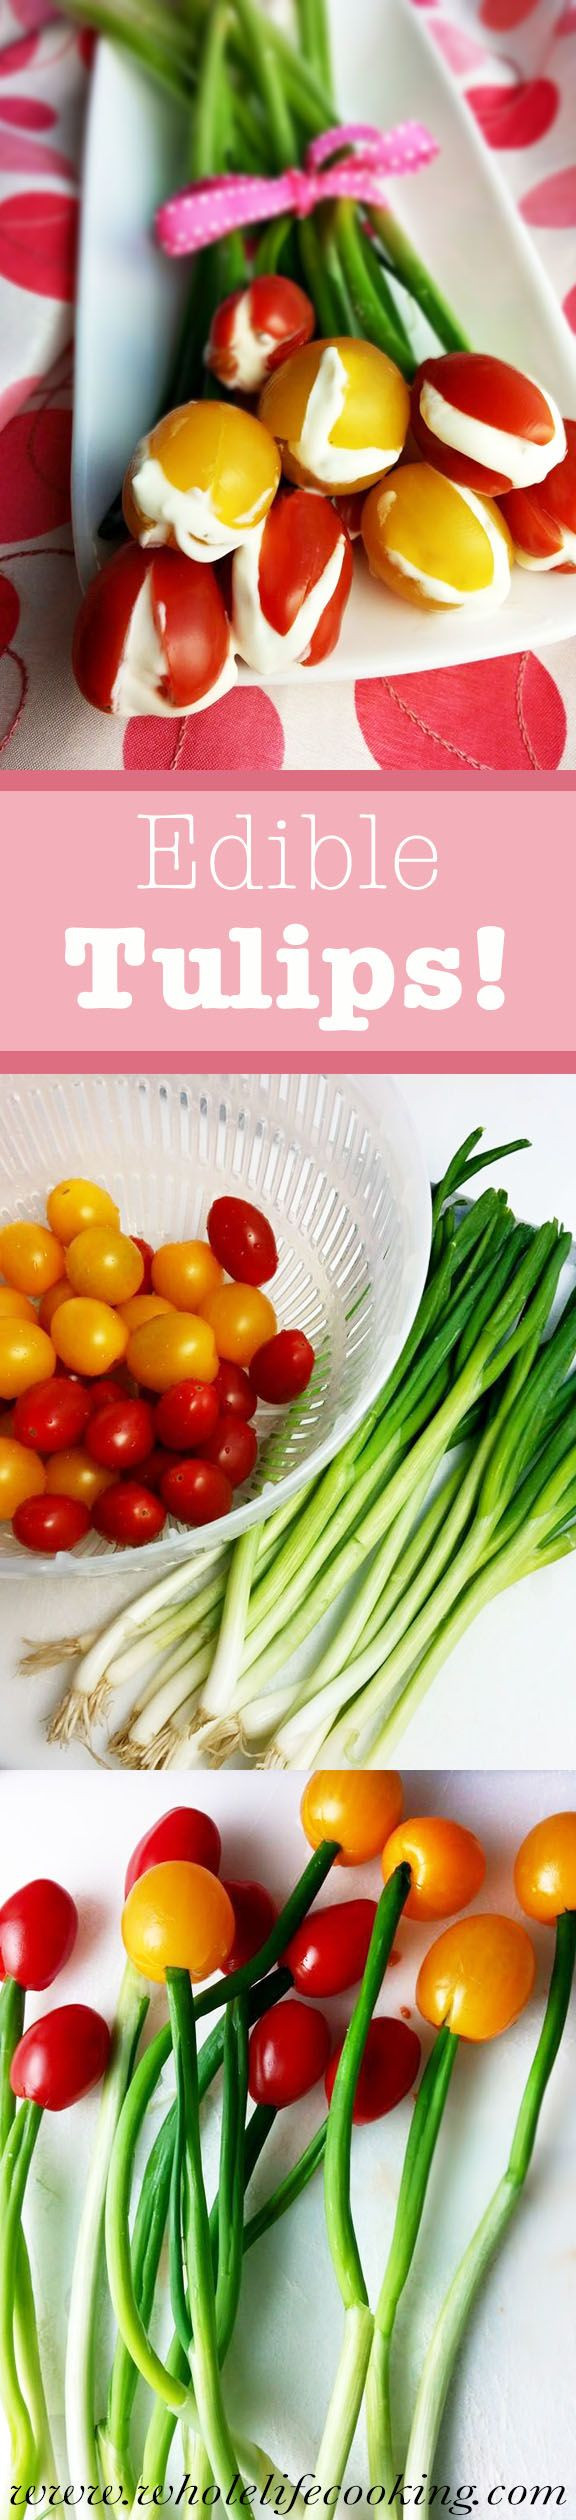 Veggies For Easter Dinner
 108 best images about